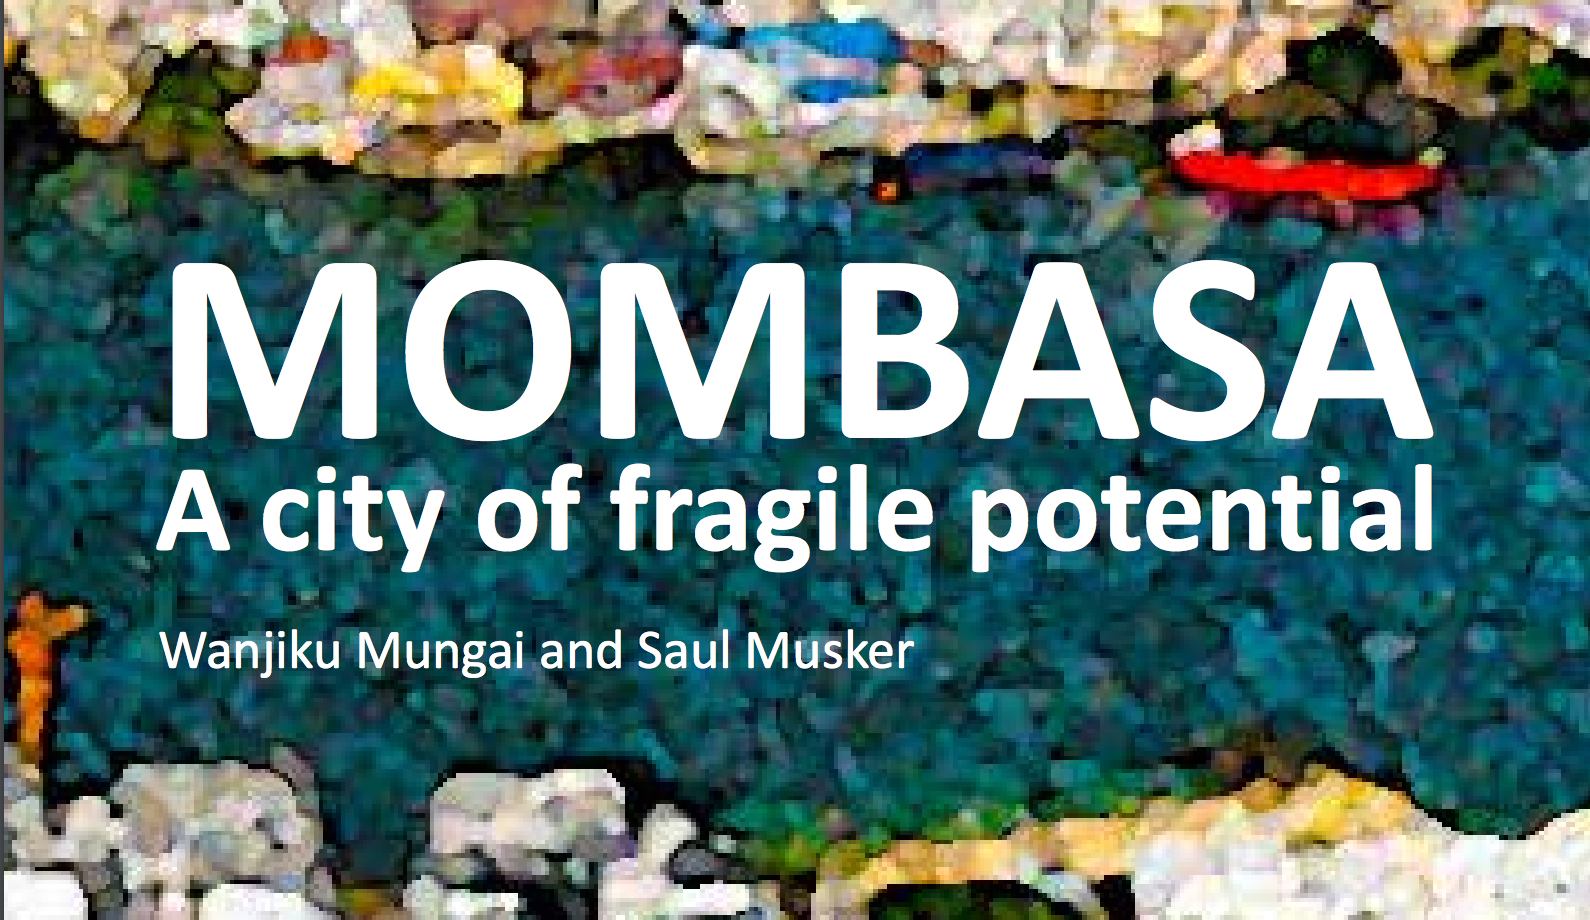 Mombasa - a city of fragile potential